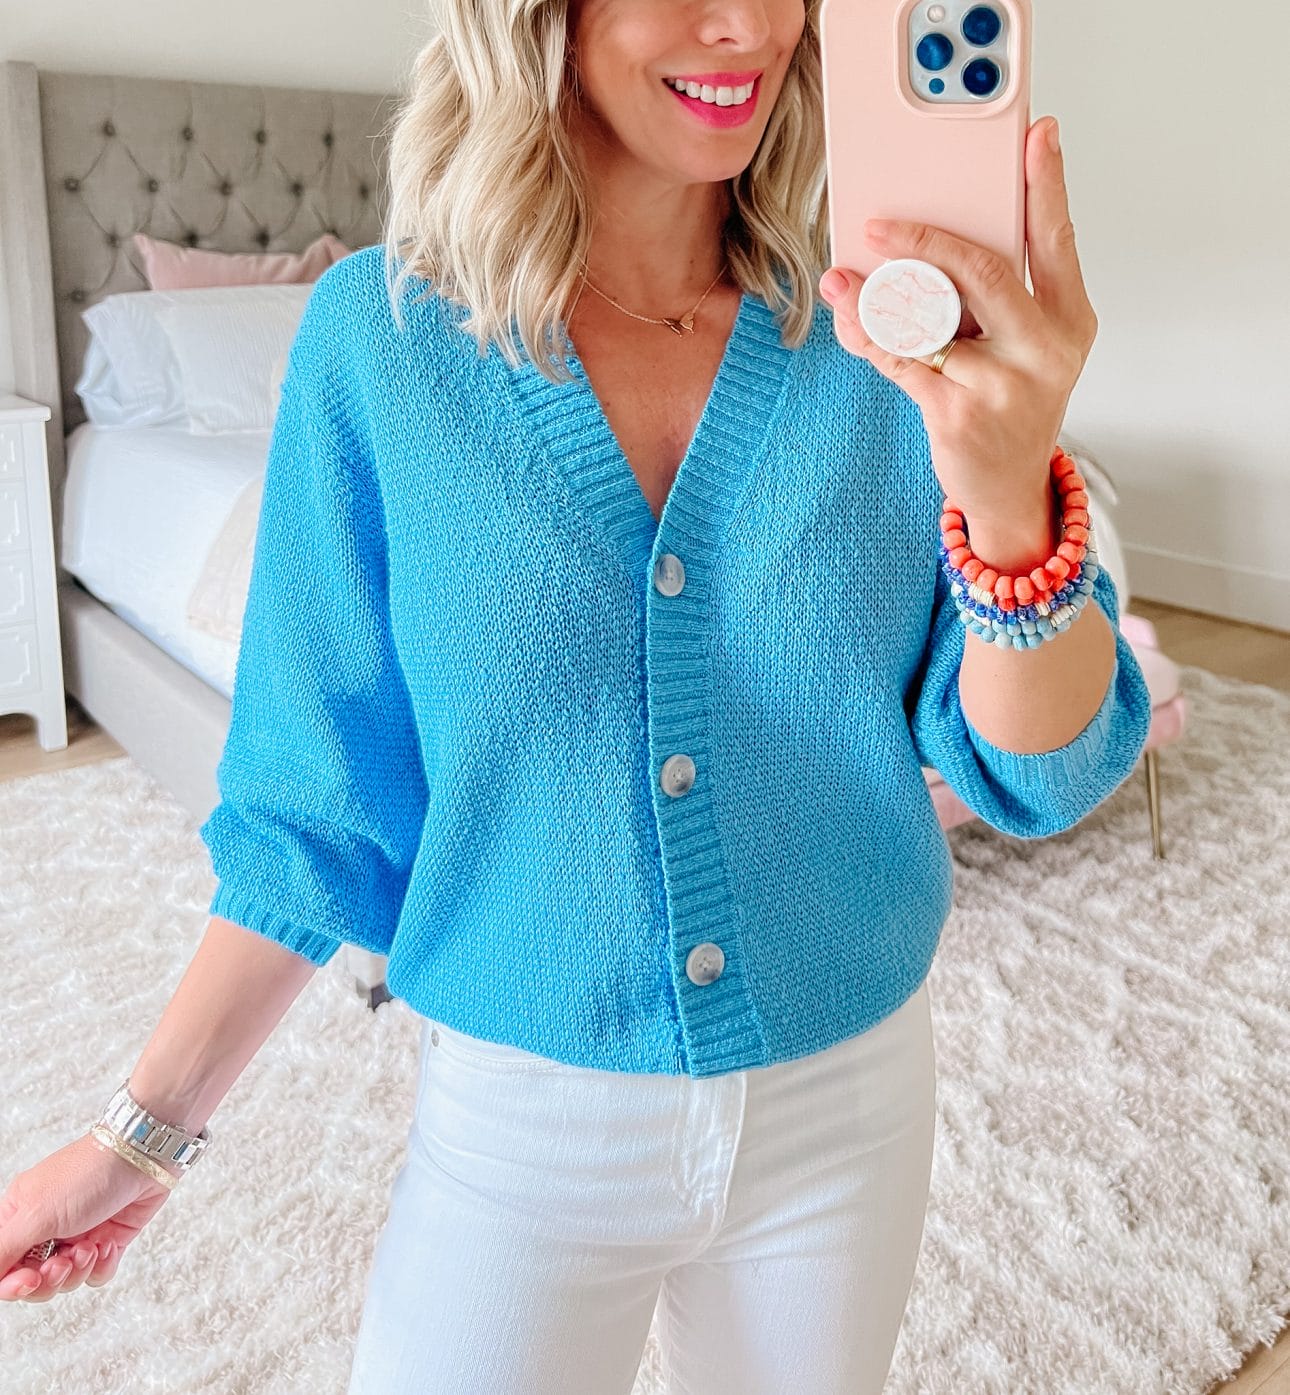 Blue Cardigan Sweater, White Jeans